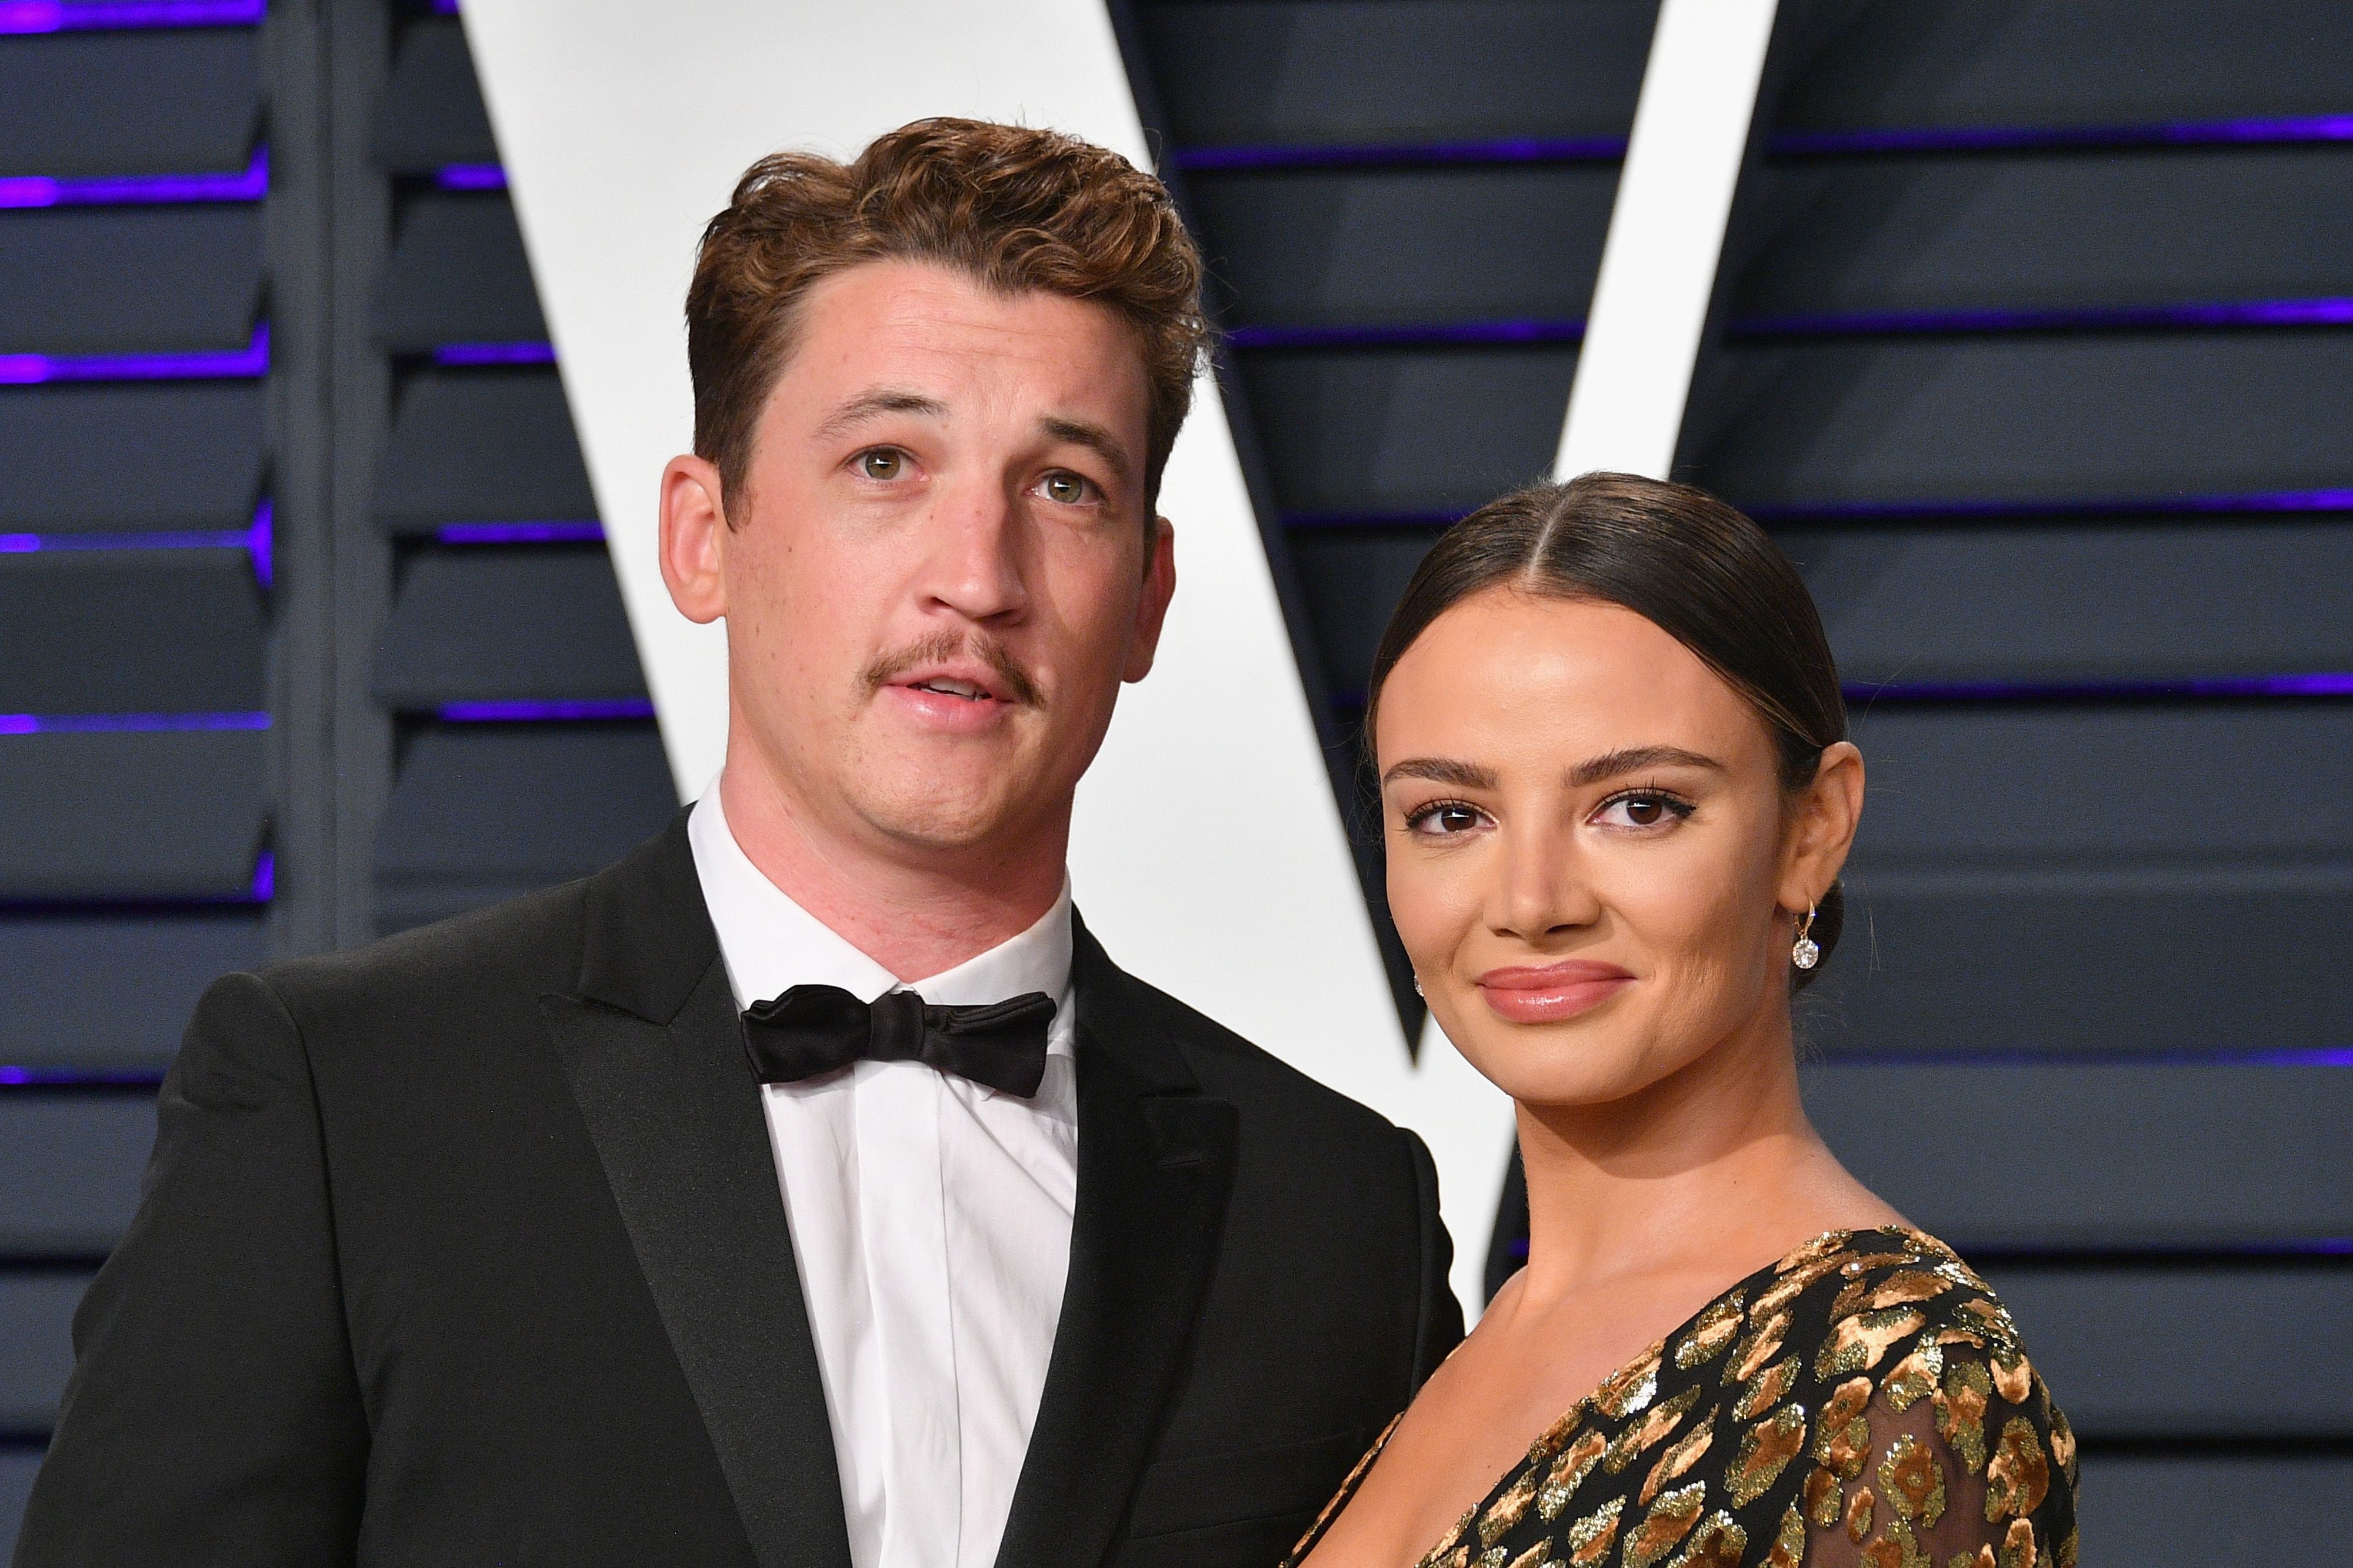 "Here's to Love&Laughter and Happily Ever After!": Whiplash Actor Miles Teller marries his long-time girlfriend and fiancee Keleigh Sperry in a weekend ceremony in Hawaii. 8